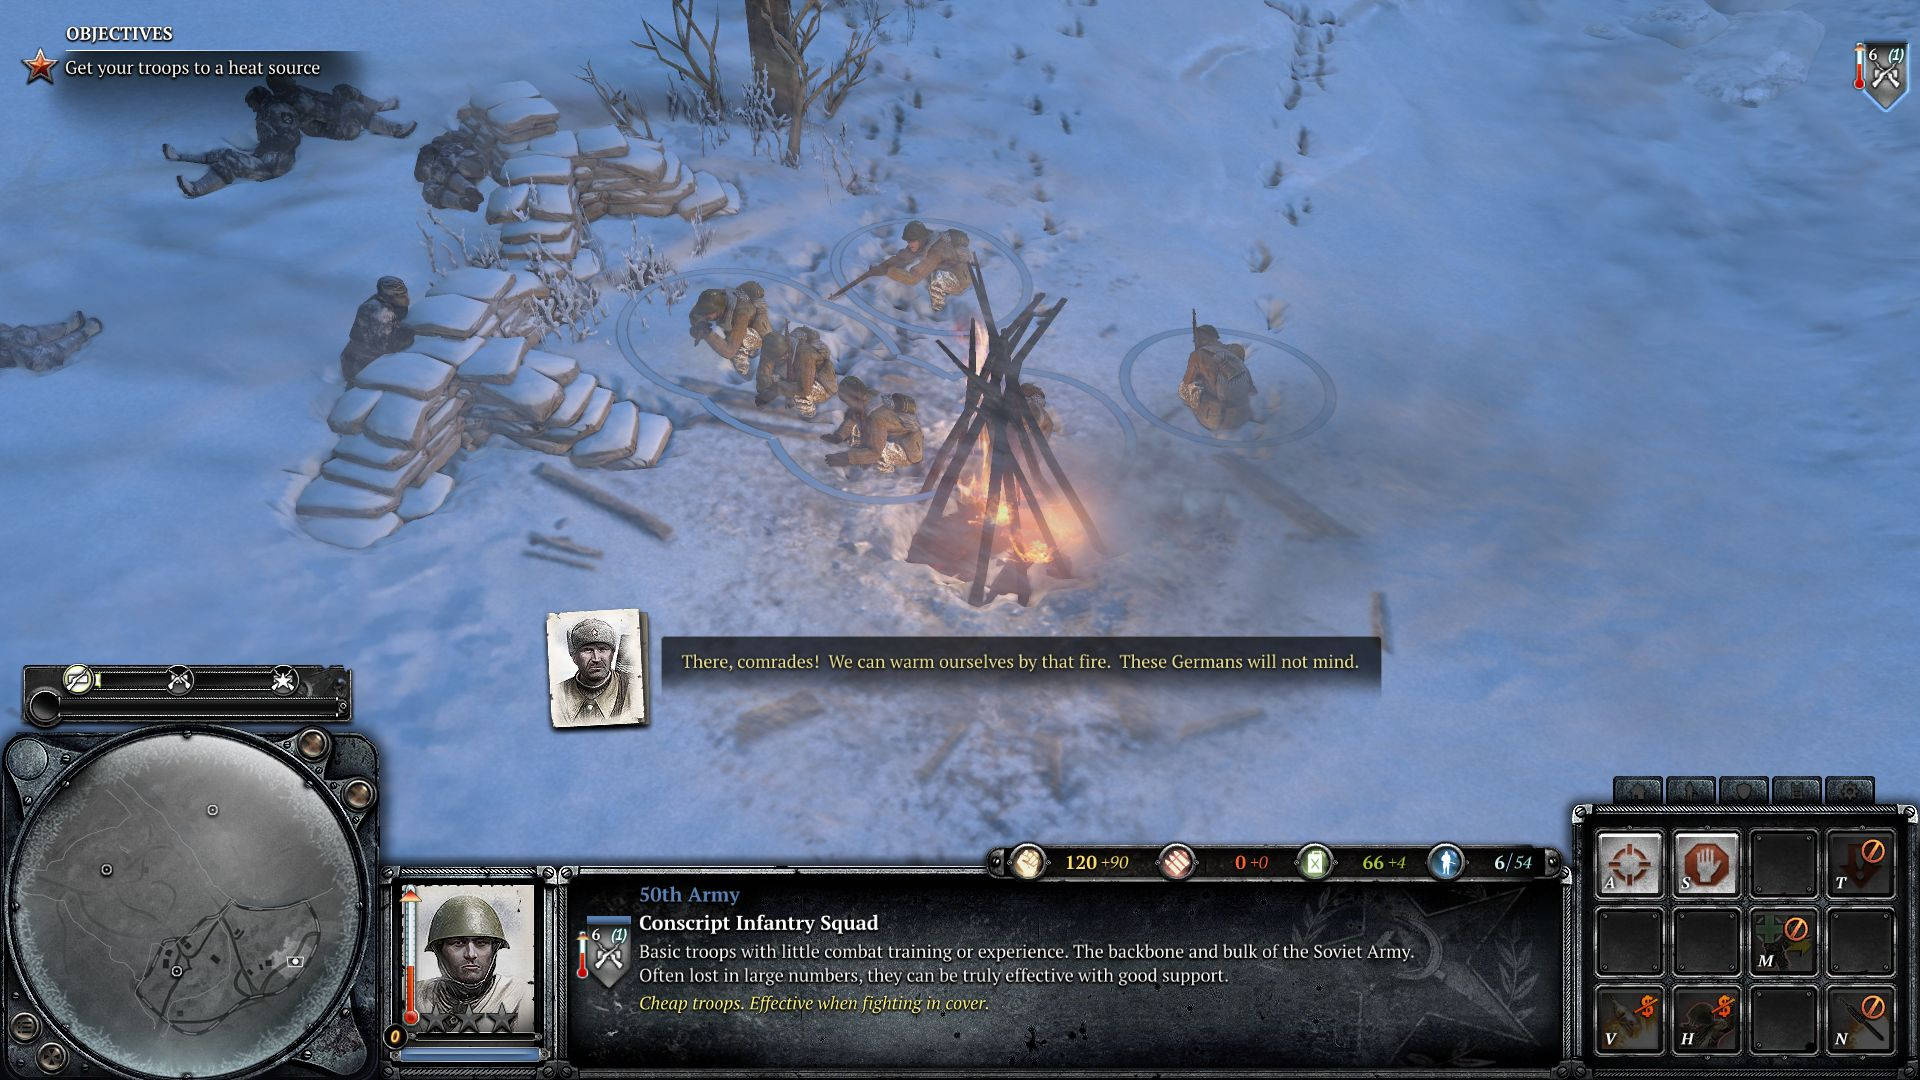 Company Of Heroes 2 50th Army Bonfire Live Tapet: Wallpaper